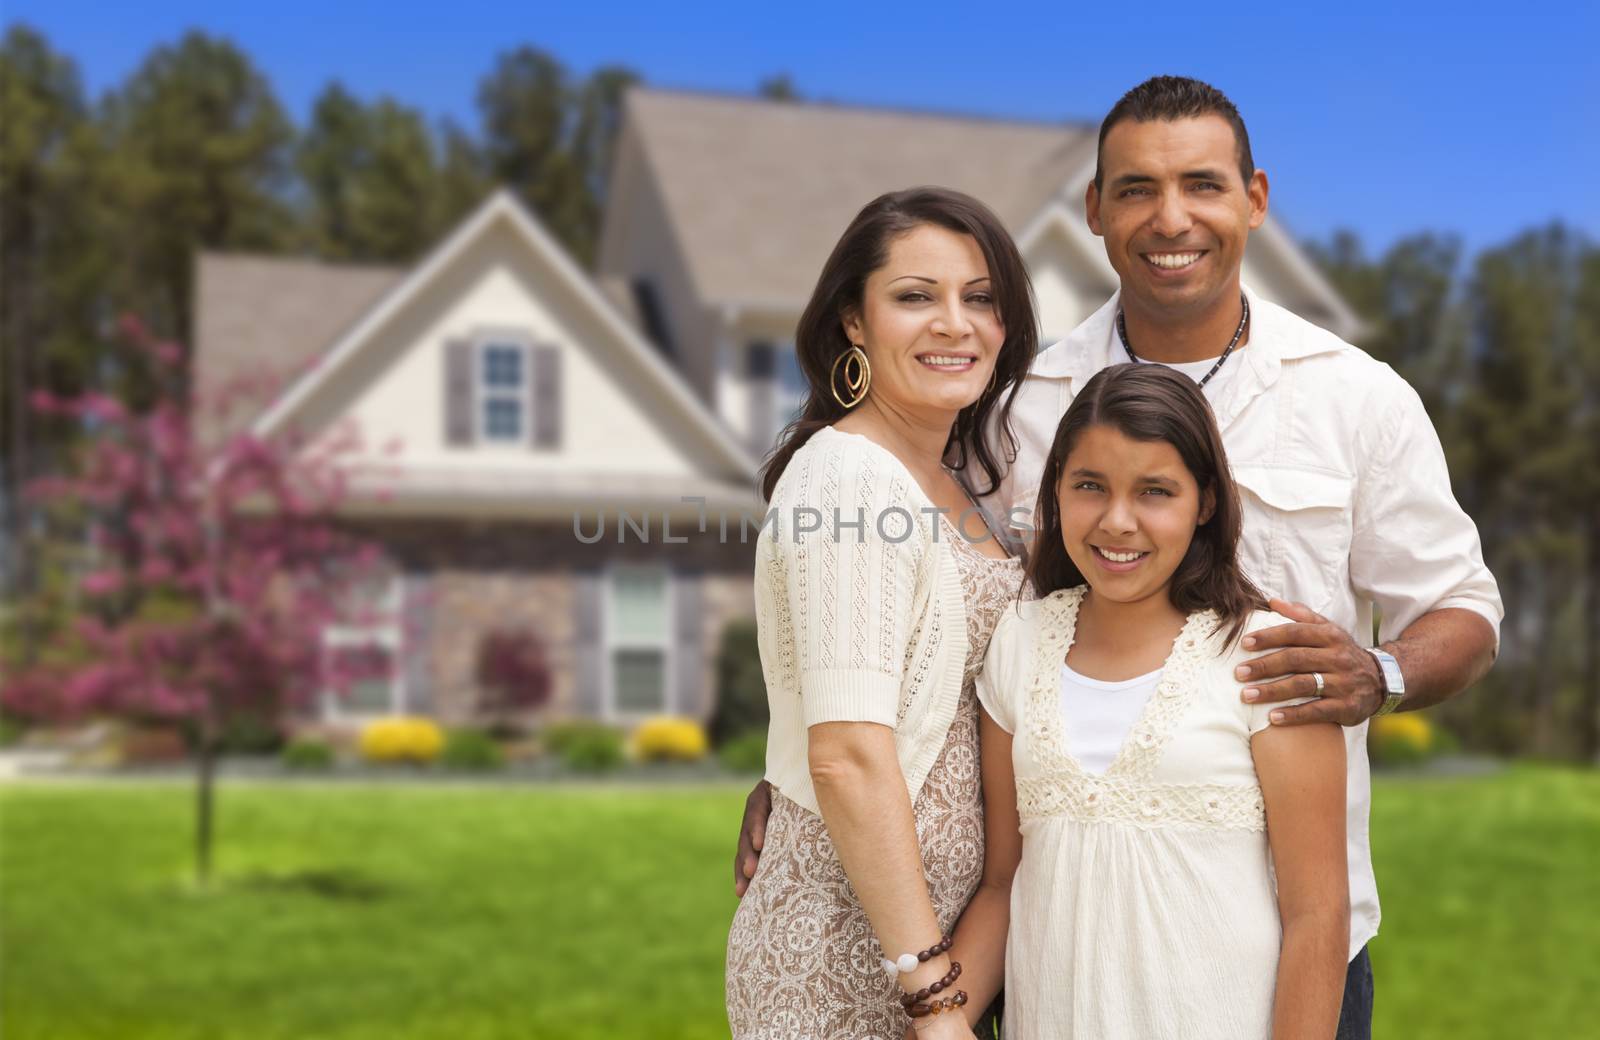 Happy Hispanic Mother, Father and Daughter in Front of Their Home.